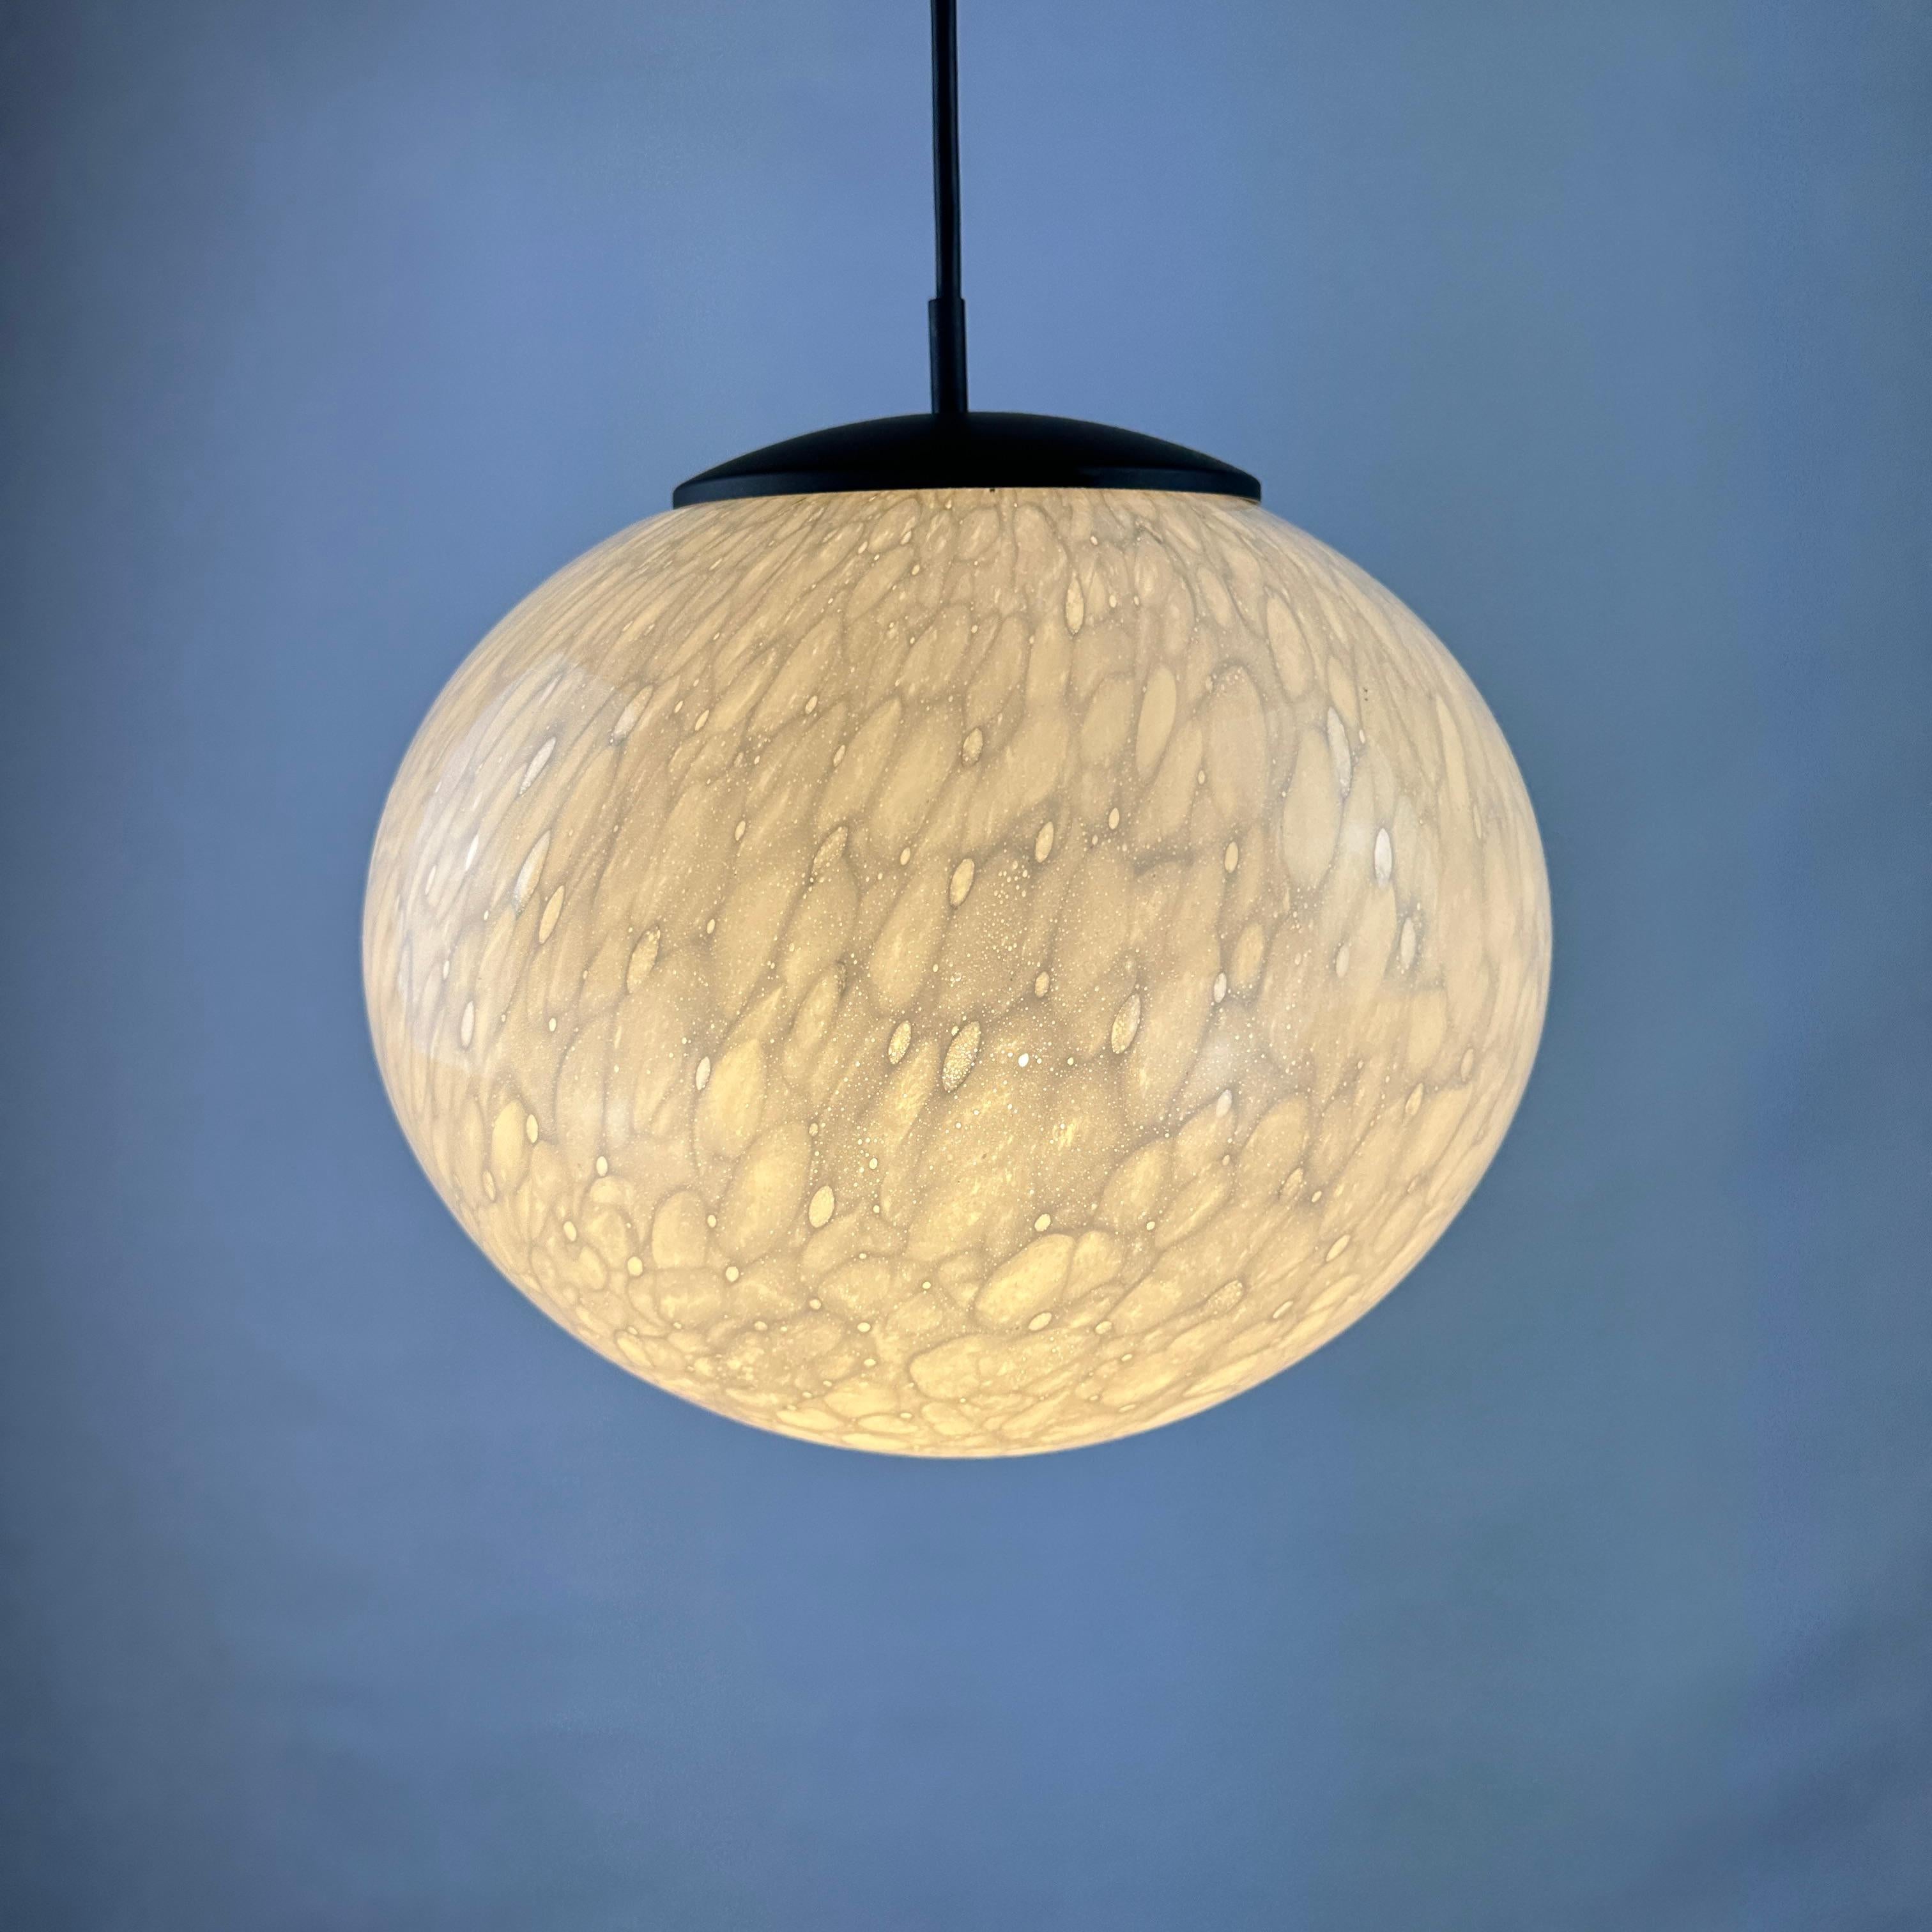 This white globe glass pendant light is made by Peill and Putzler and is produced around 1970. It has a marbled pattern which is made due the glass blowing process which makes this a unique piece. 

This is a pretty rare piece that doesn't show up